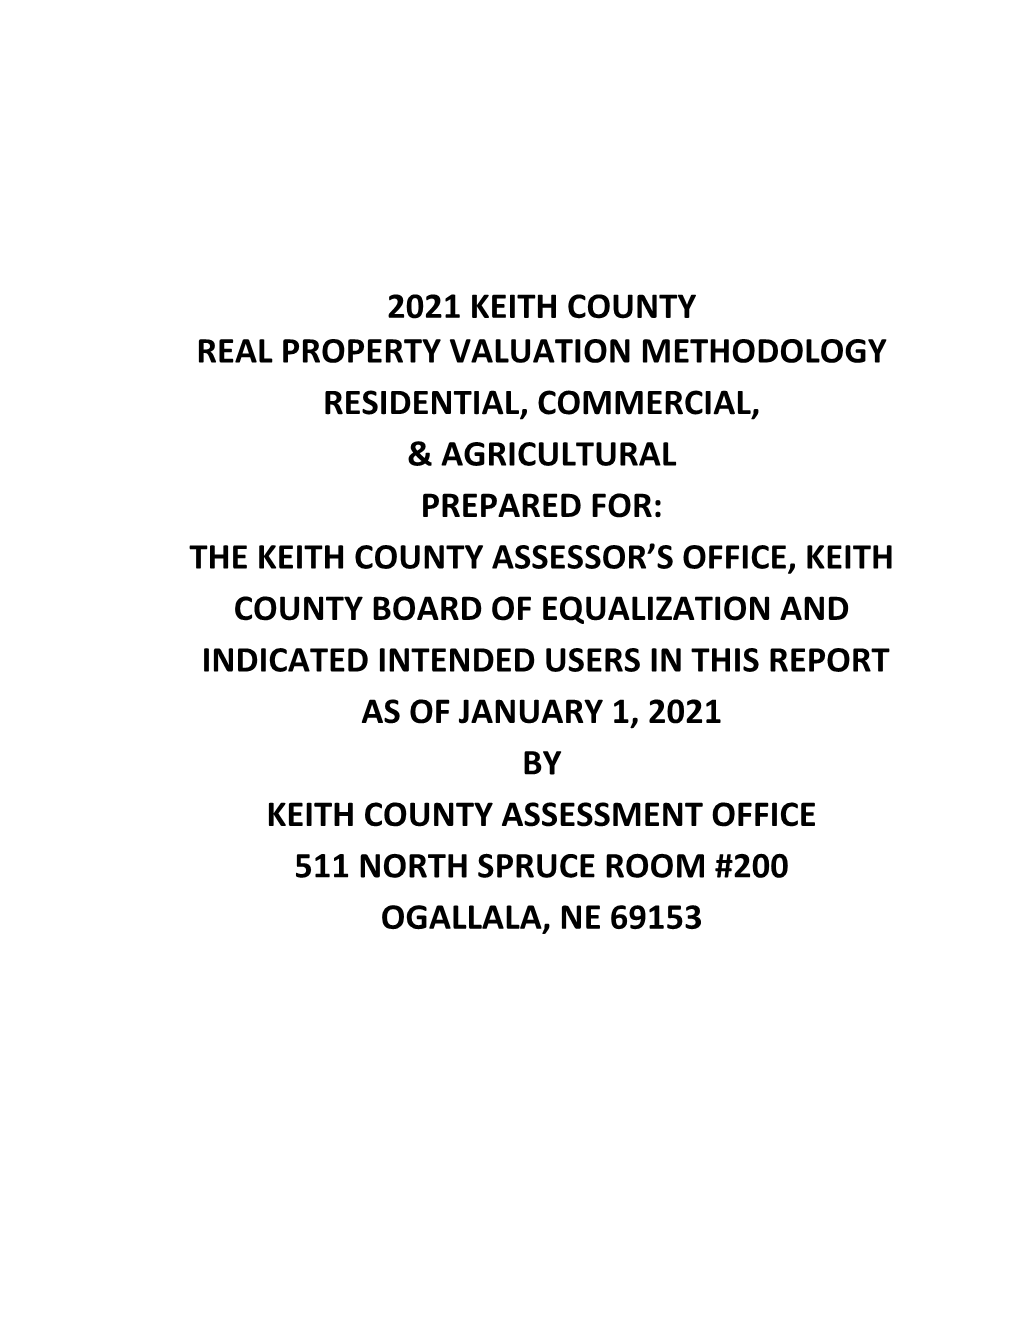 The Keith County